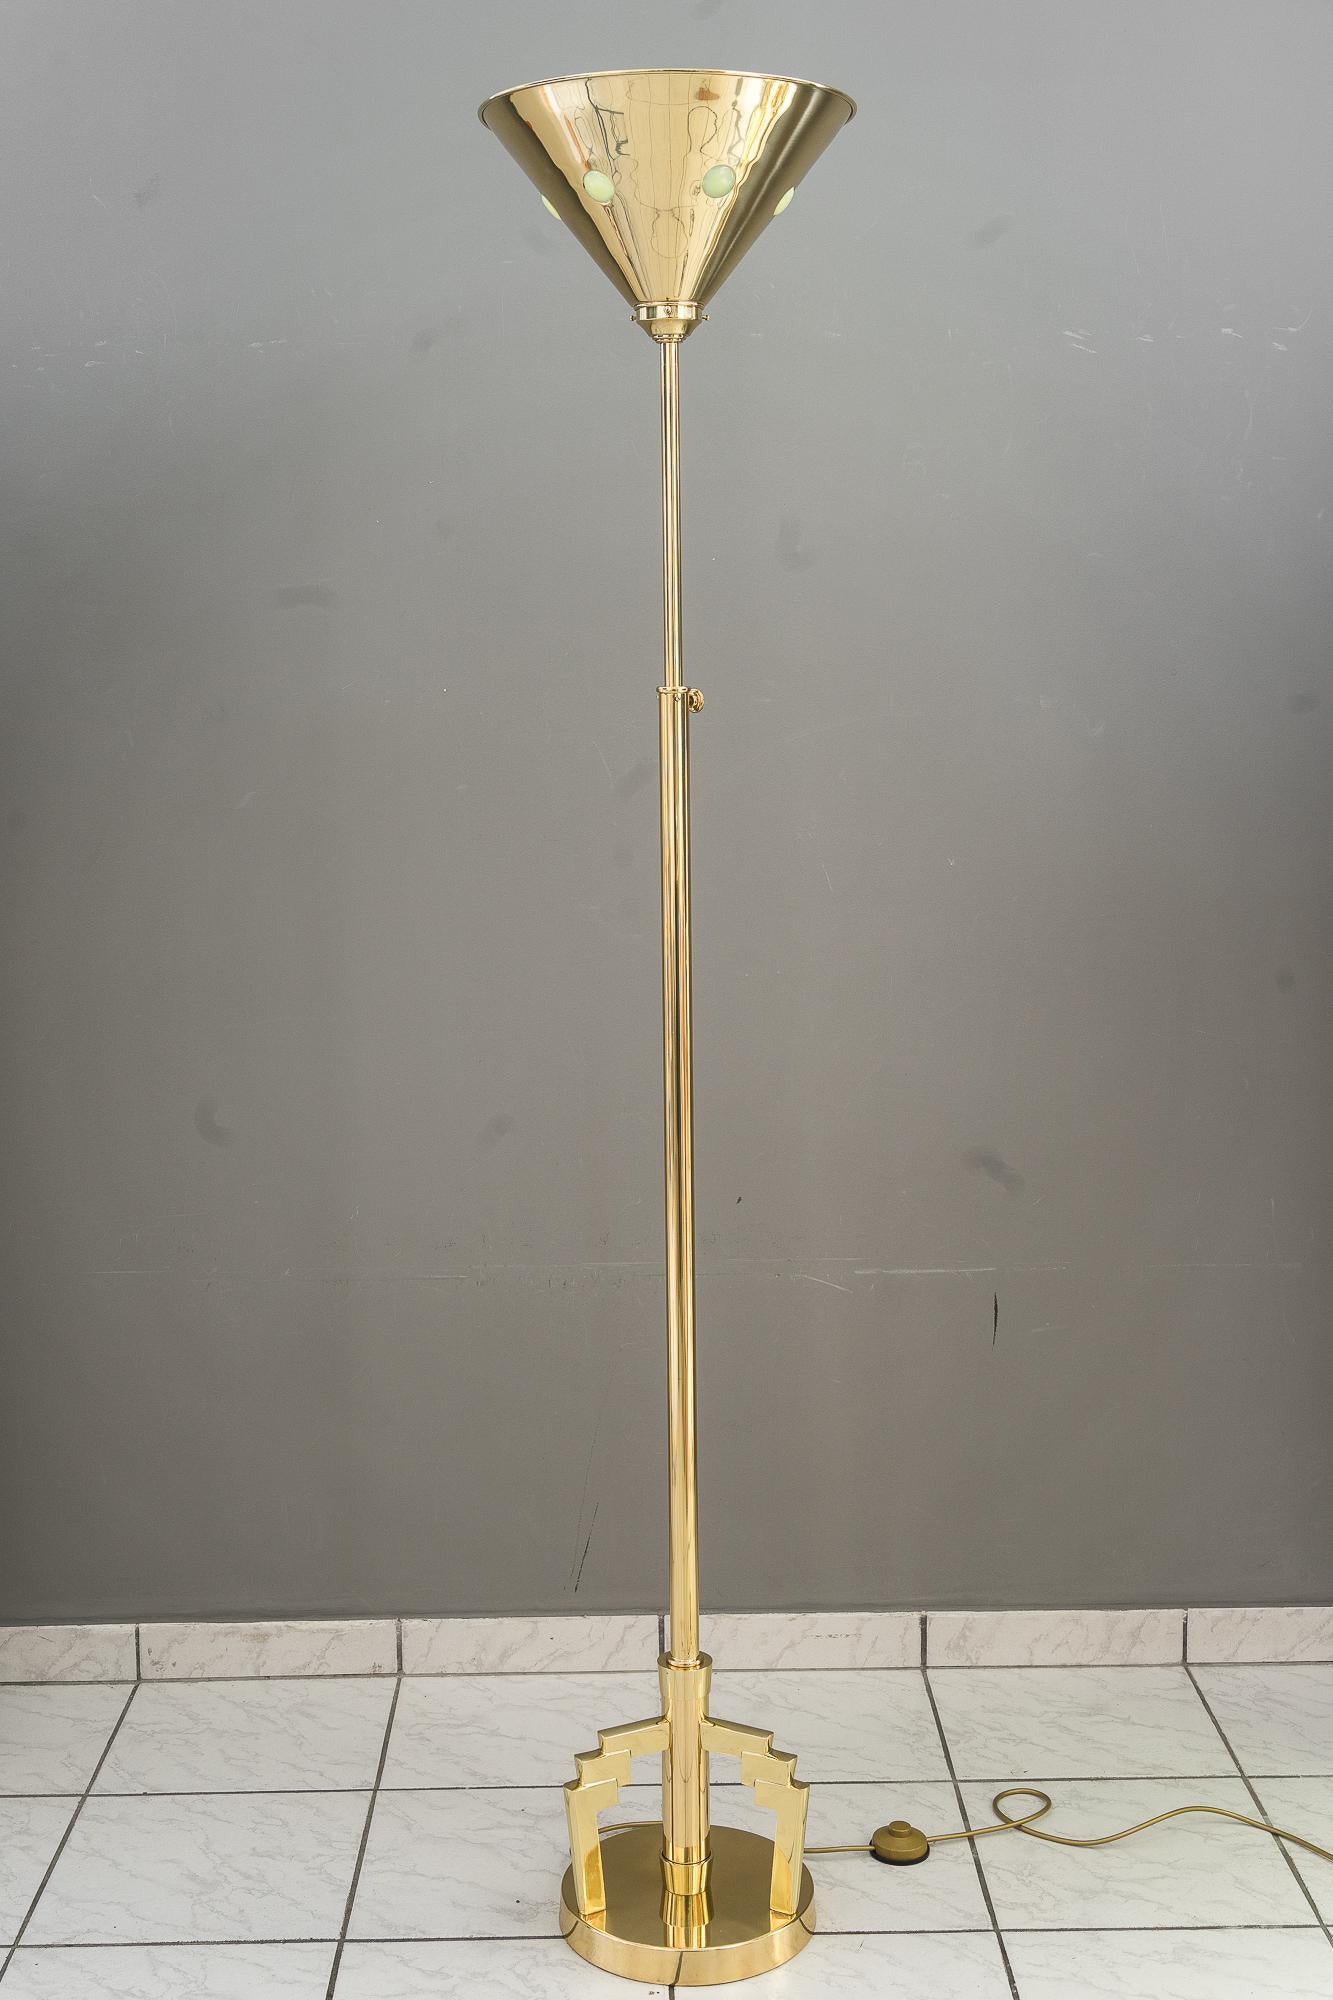 Adjustable Art deco floor lamp with opaline glass on shade Vienna, around 1920s
Polsished and stove enameled.
Opaline glass stones on the shade.